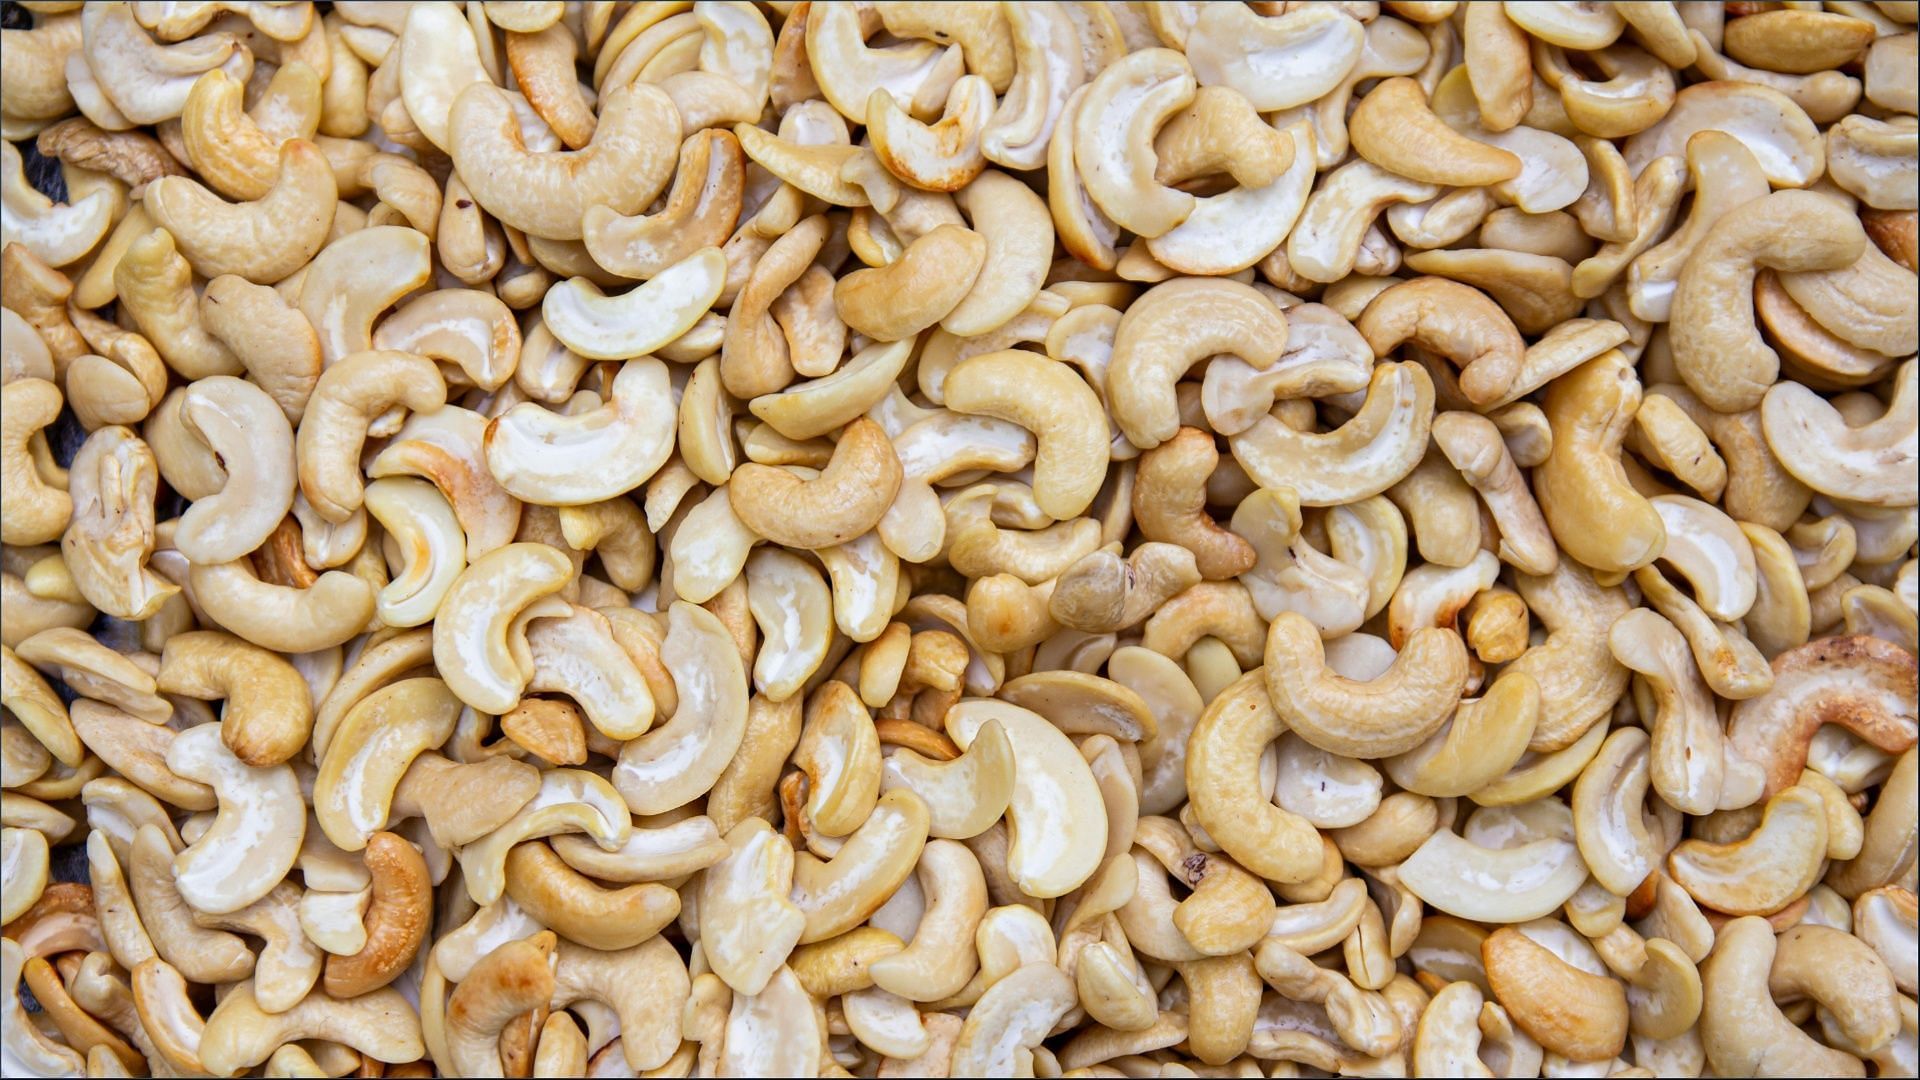 The recalled cashew products could be contaminated with salmonella (Image via Pexels)